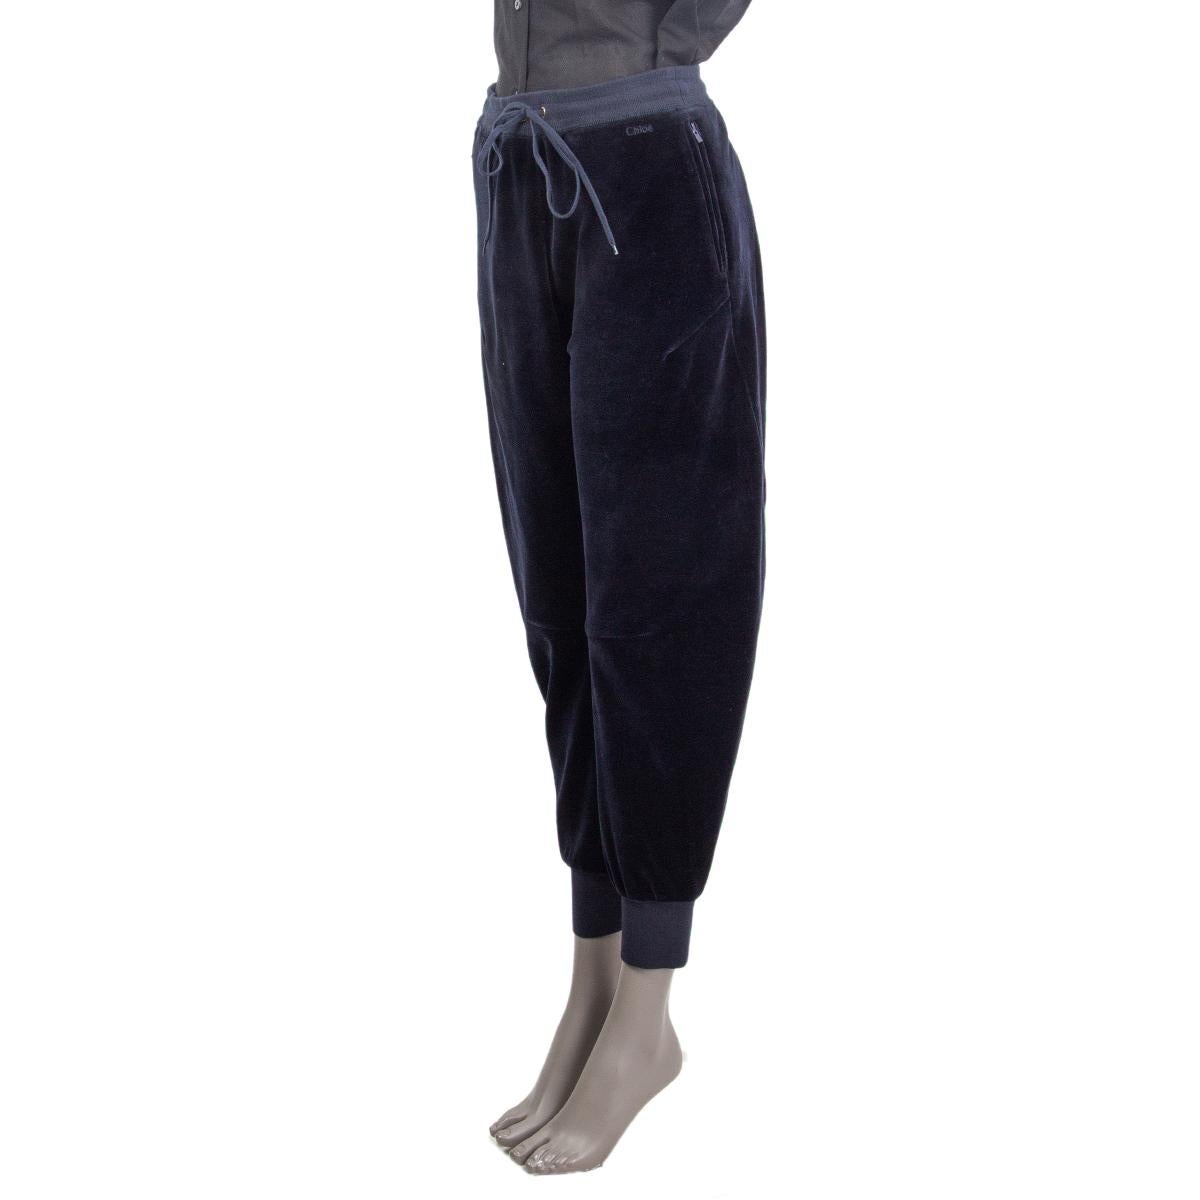 100% authentic Chloé velvet sweat pants in navy blue cotton (80%) and polyester (20%) with zipper pocket and an elastic drawstring waist. Lined in cotton (100%). Have been worn and are in excellent condition. 

Measurements
Tag